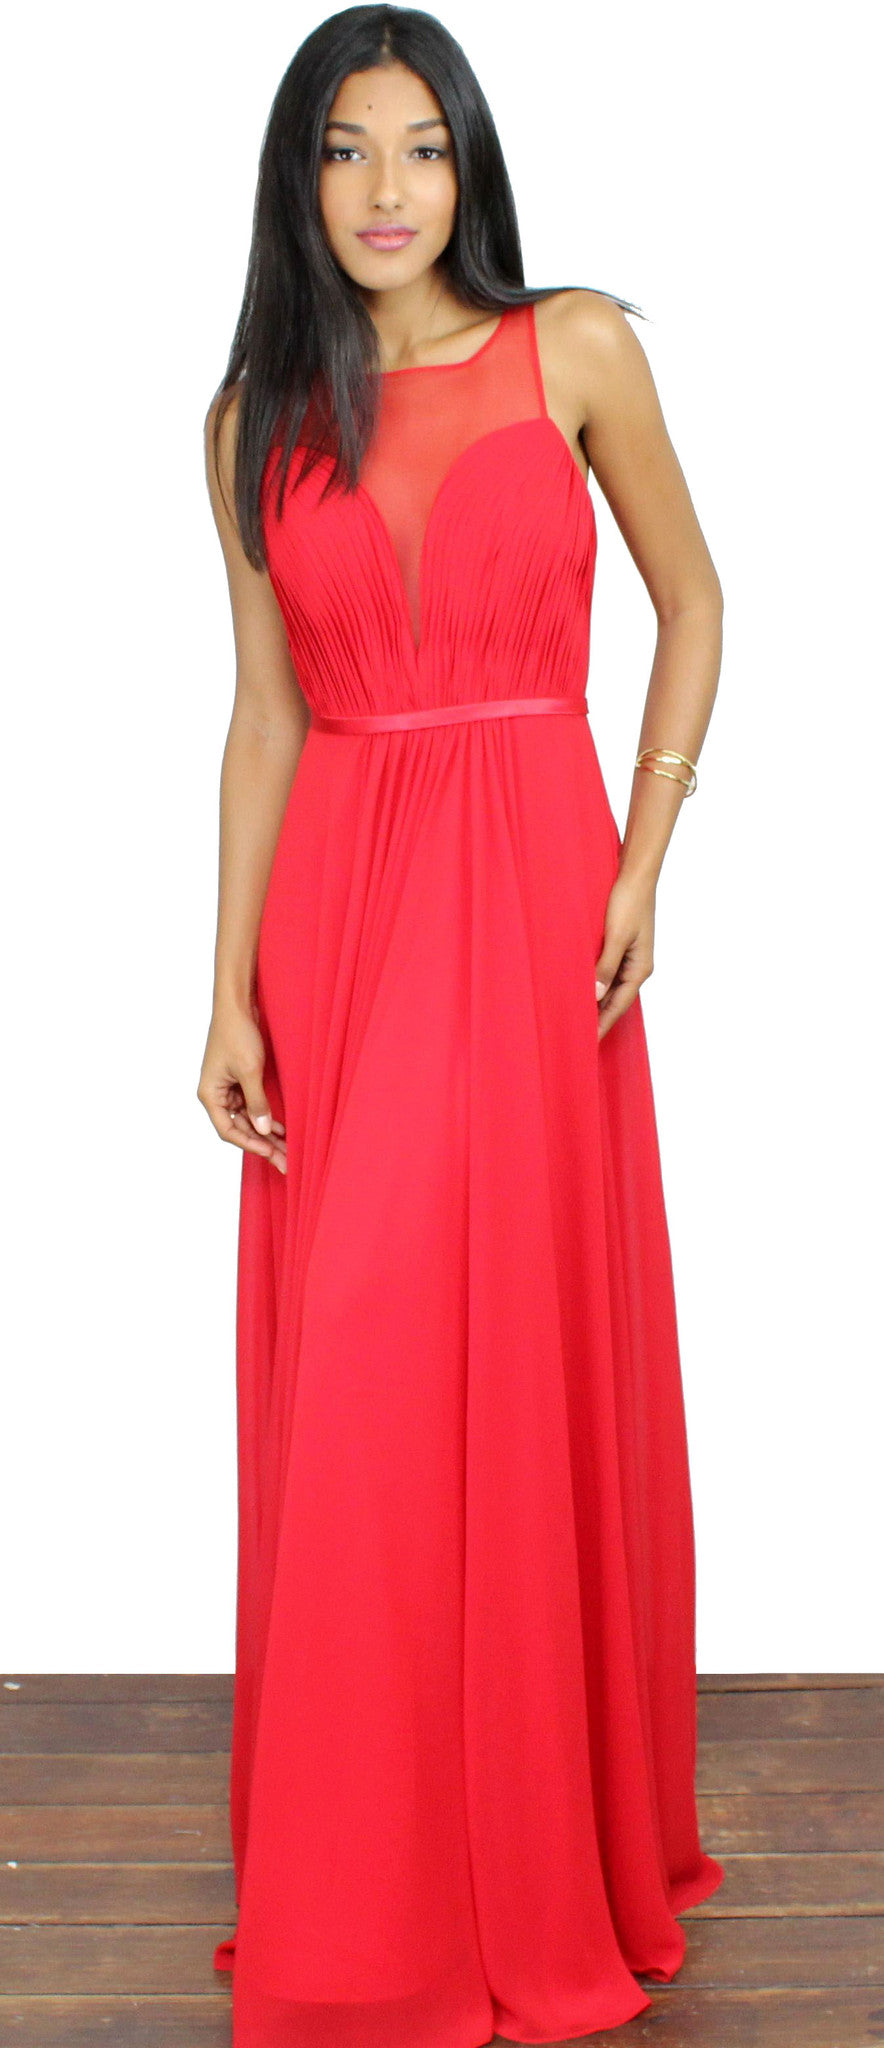 Looking Glass Red Draped Gown